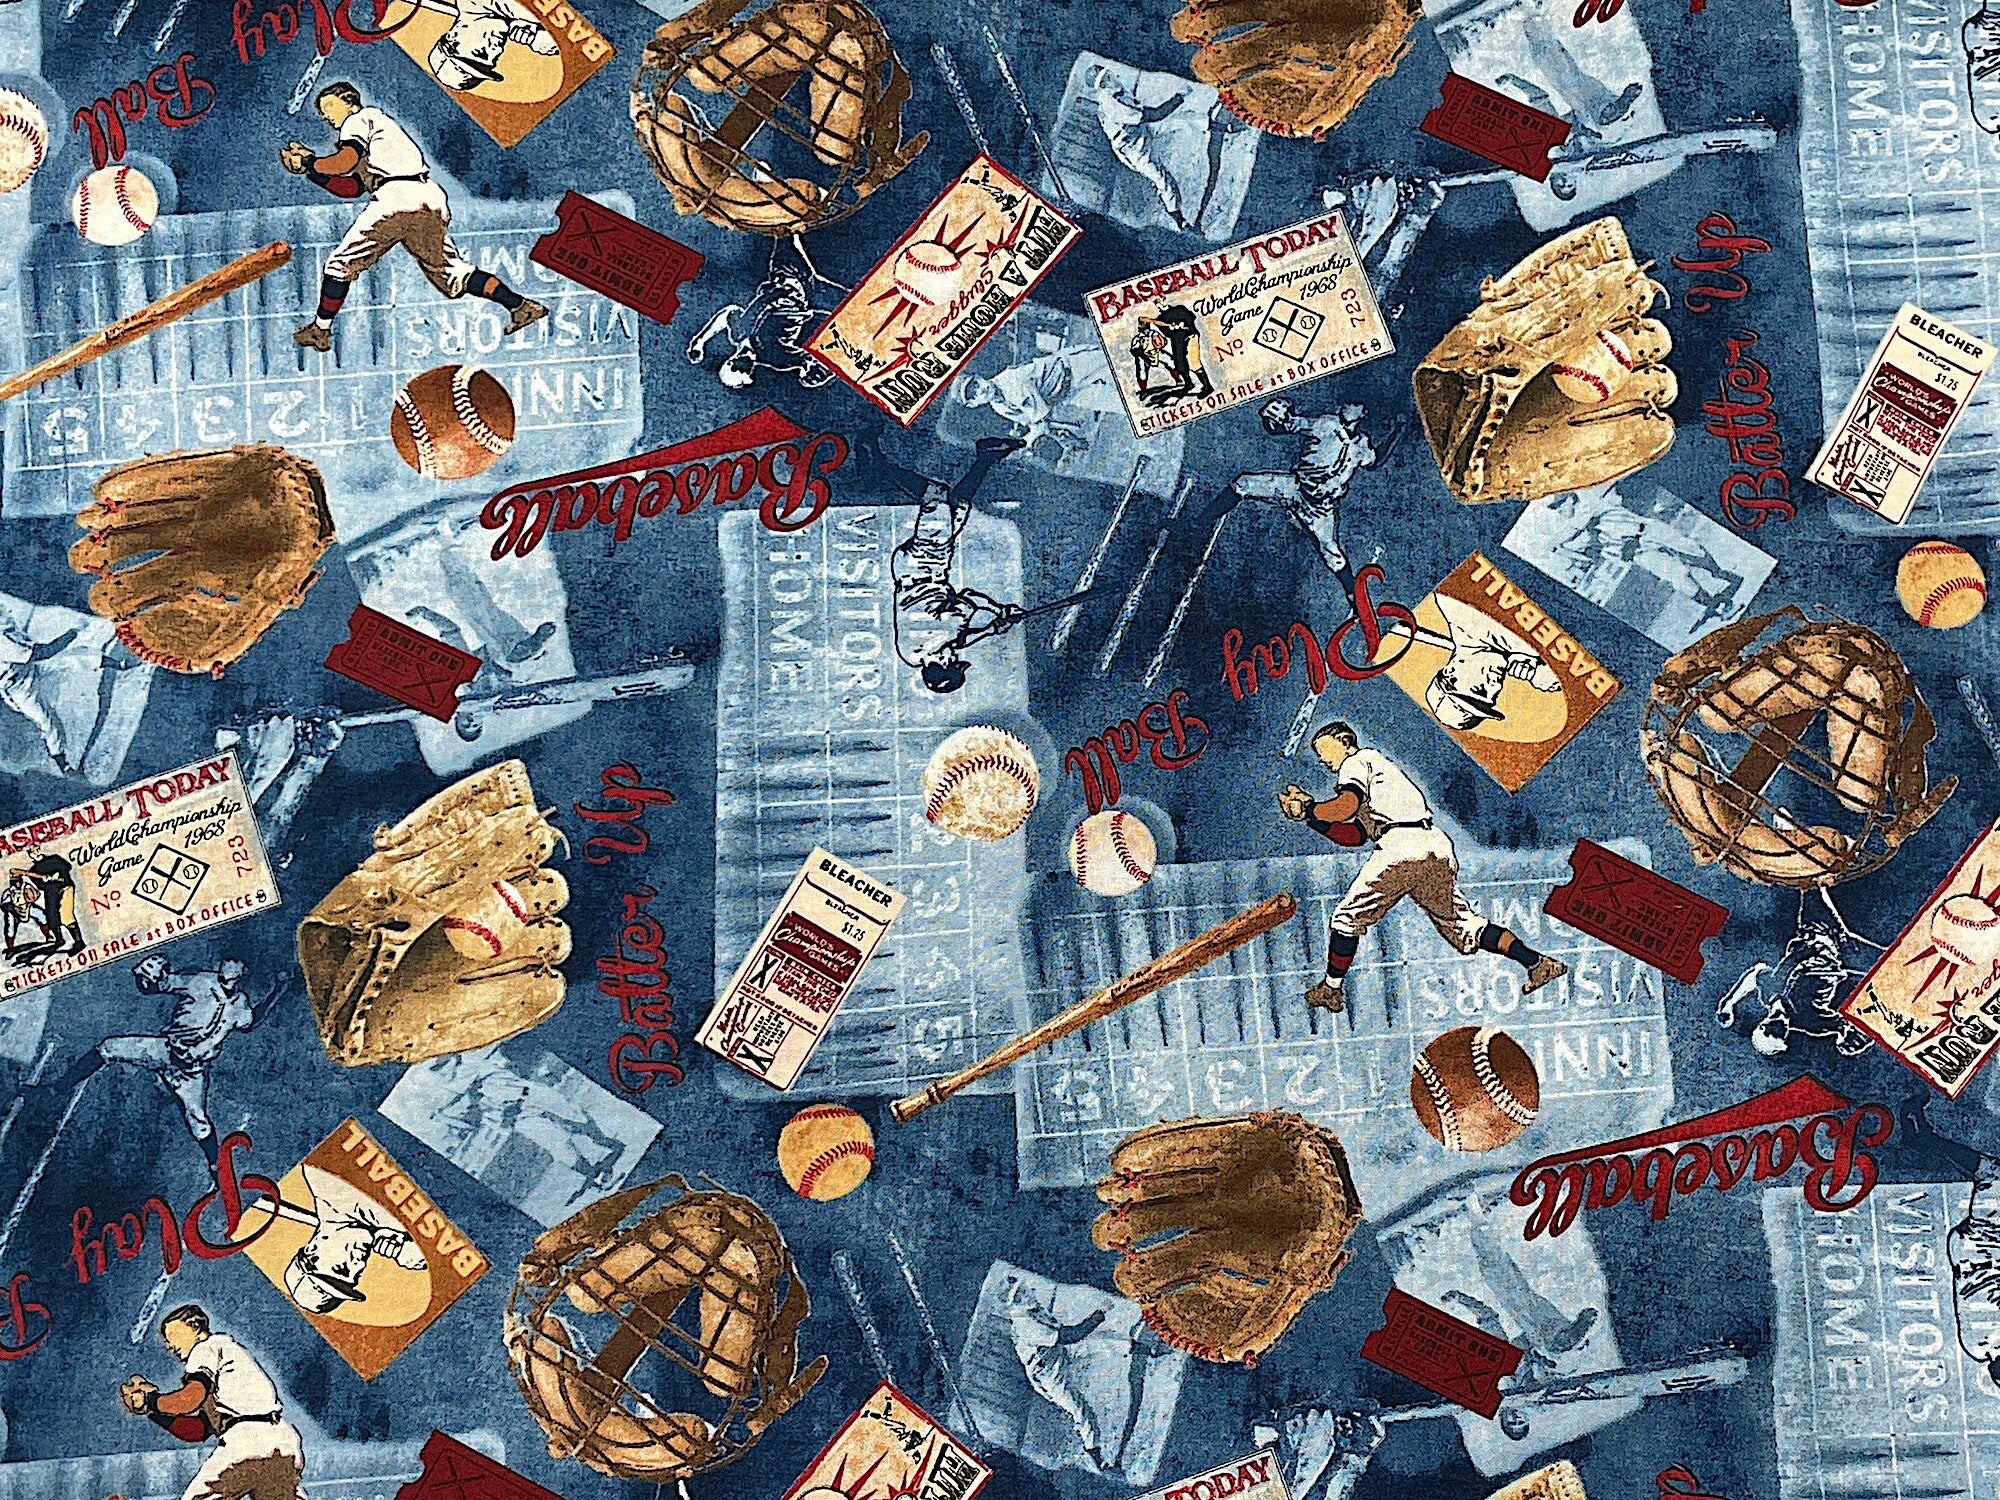 This cotton fabric is covered with baseball gloves, bats, balls, tickets, players and more.